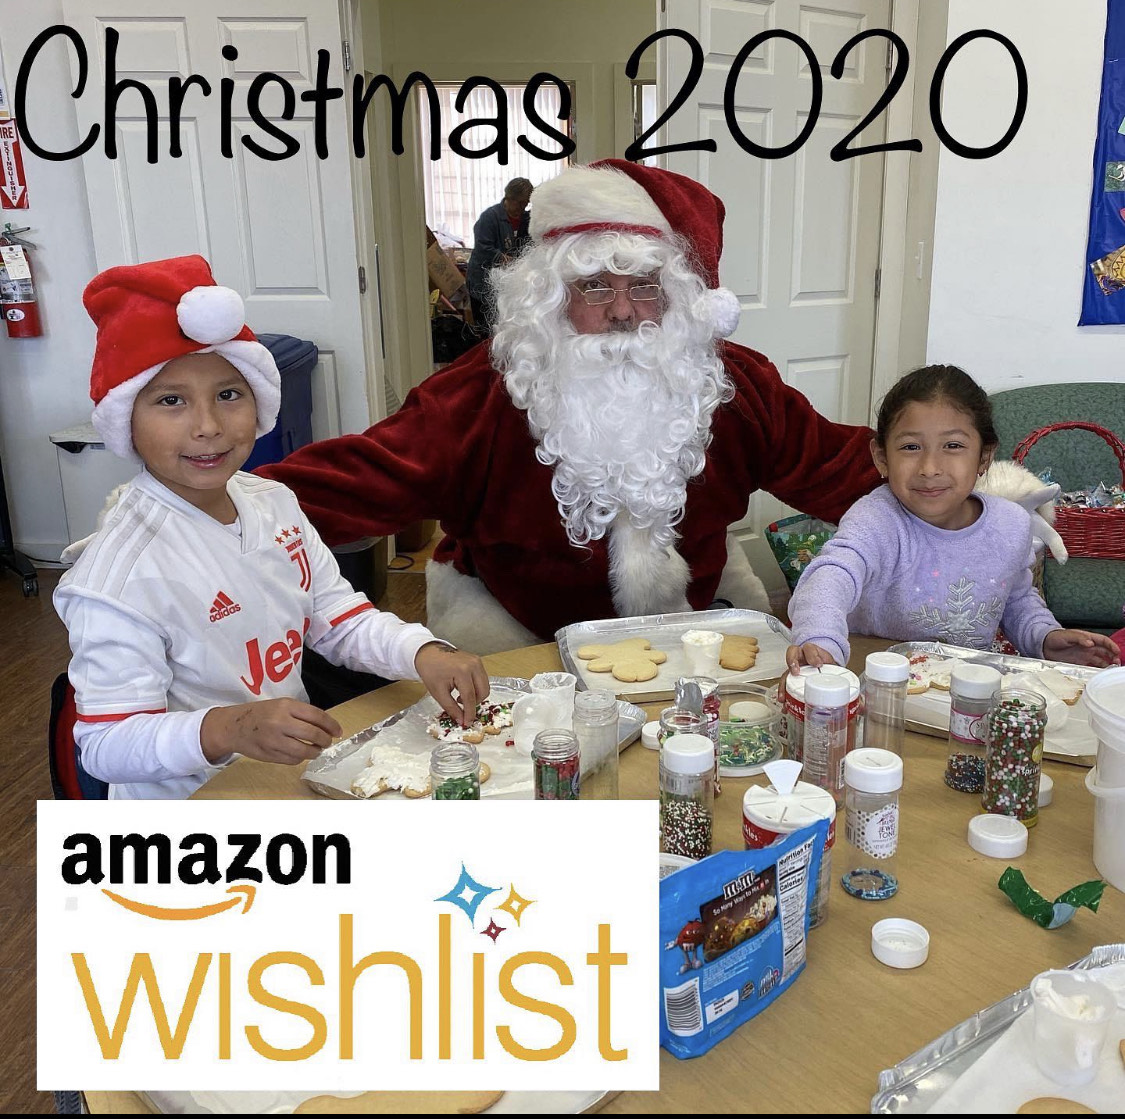 Help the WAMC raise money to give local farm workers' children a wonderful Christmas!